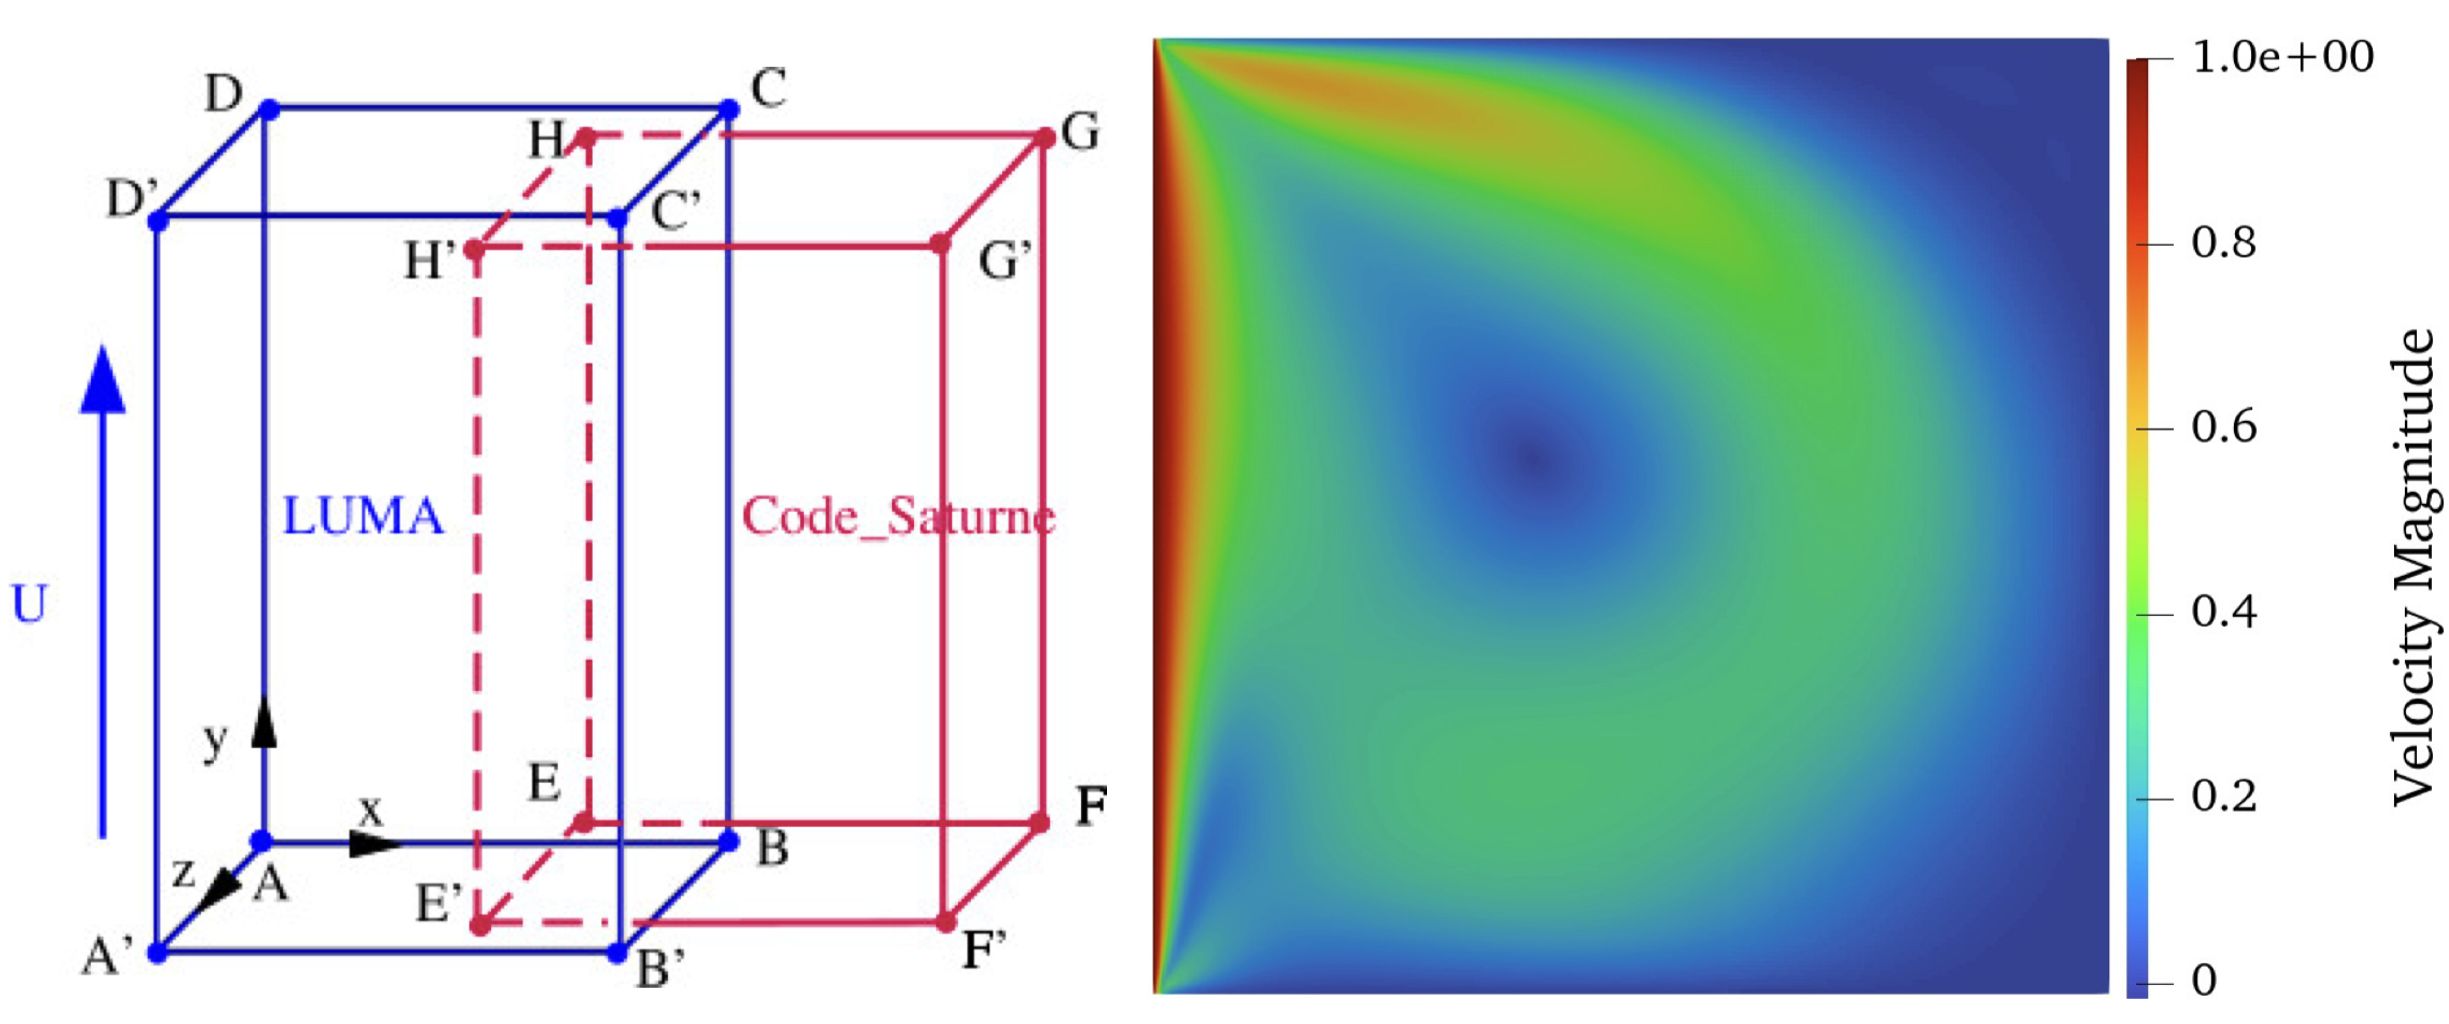 Multi-Resolution Coupling for Exascale Engineering